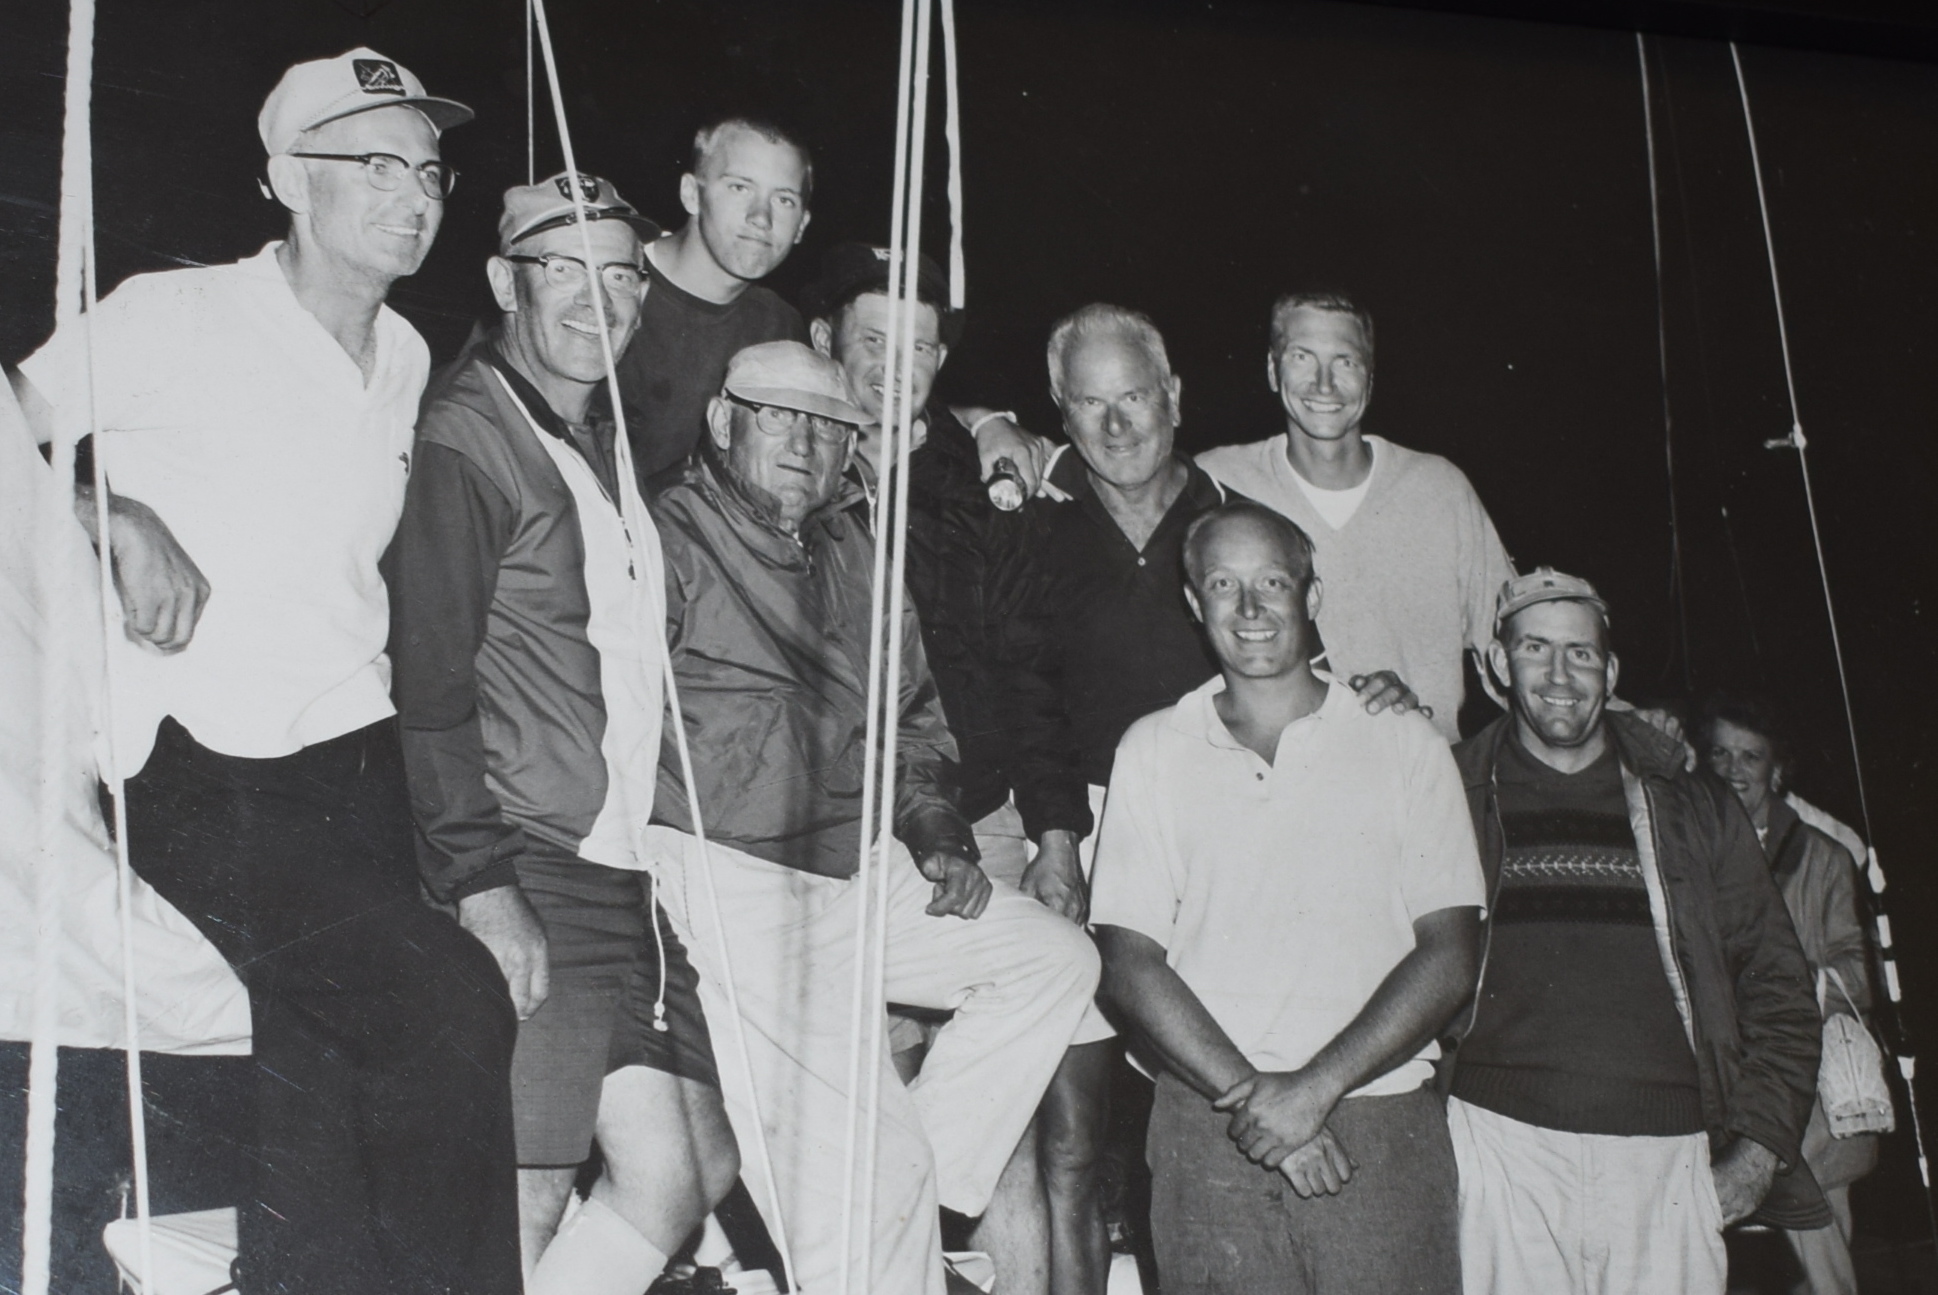 Jack Wagner, left, celebrates with his crew after winning the Bayview-Mackinac Overall Cruising Class in 1962.